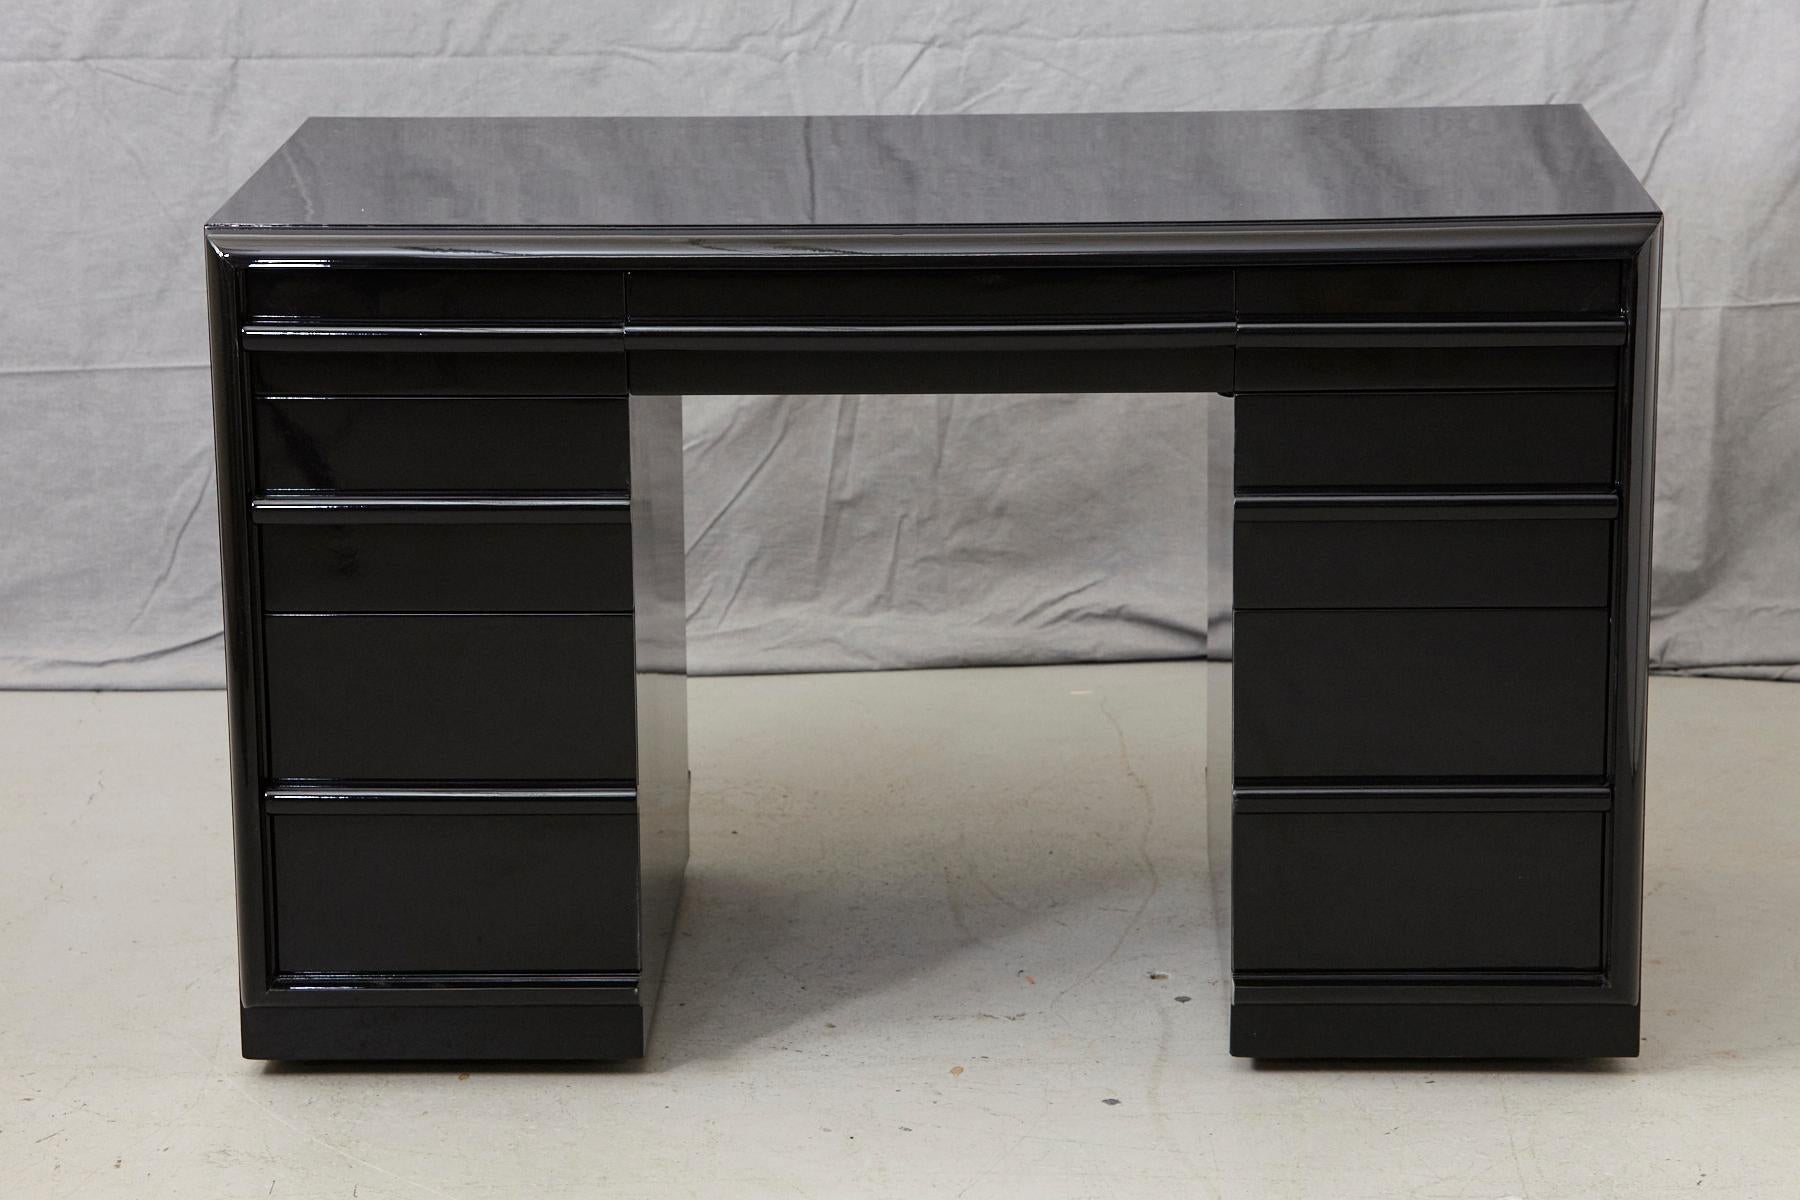 Stunning T.H. Robsjohn-Gibbings kneehole or double pedestal desk in new black piano lacquer finish.
The desk is equipped with 3 drawers in each pedestal and a middle drawer mounted on casters.
The kneehole measurements are as follows: W 20.25